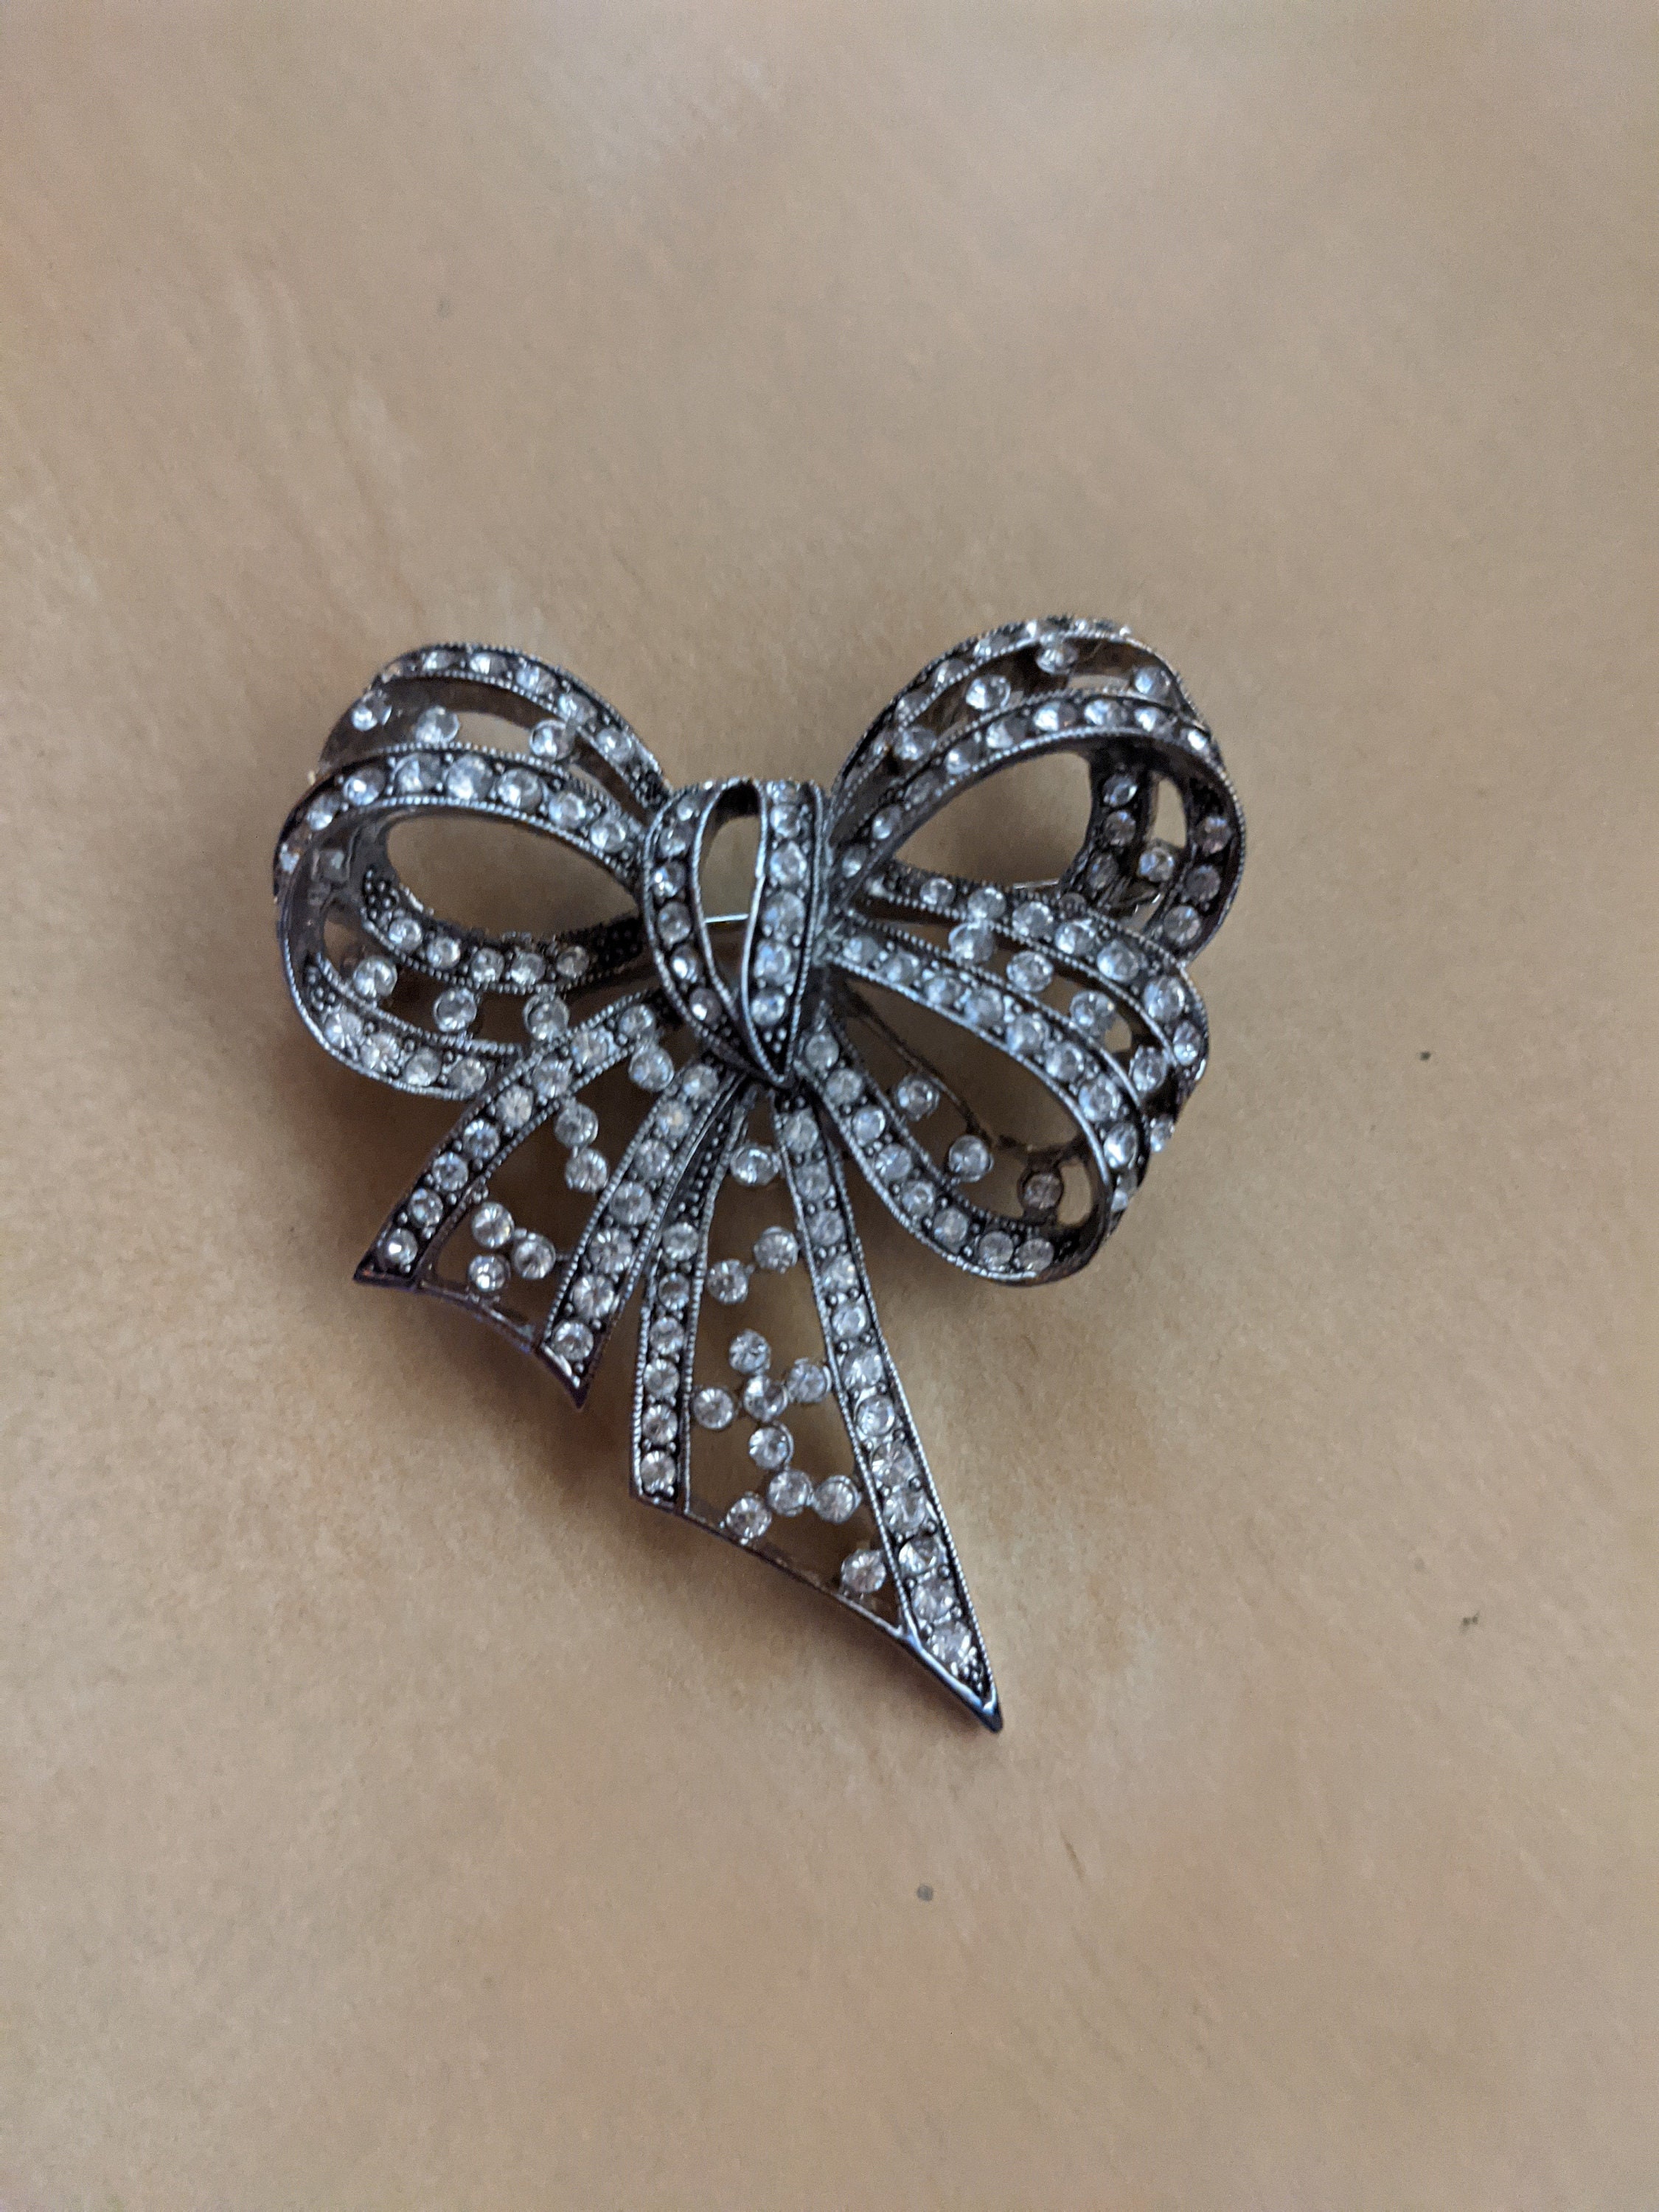 QIAN0813 Black Color Rhinestone Bow Brooches for Women Large Bowknot Brooch Pin Vintage Jewelry Winter Accessories